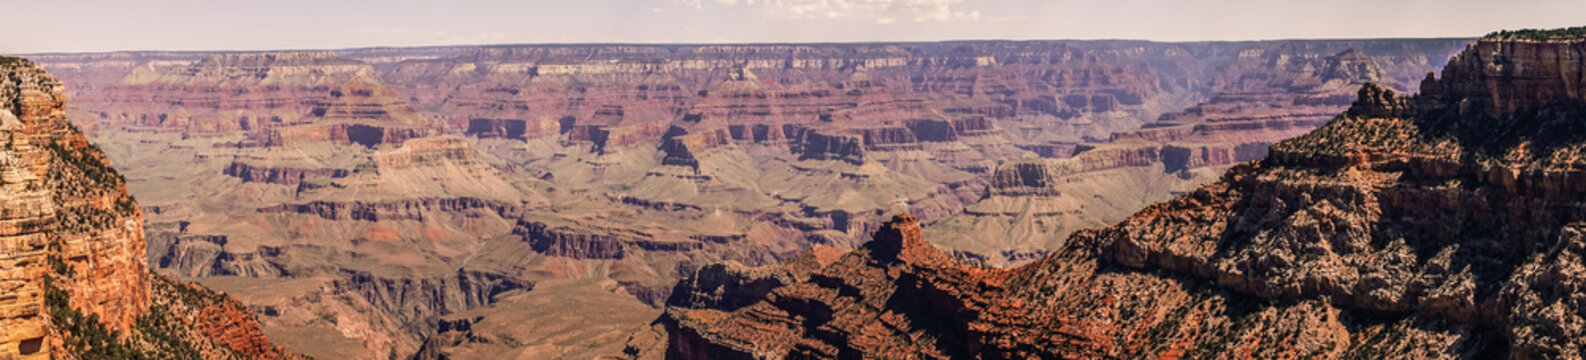 Rocky cliffs of the Grand Canyon. Grand Canyon Village, Arizona. Picturesque panorama